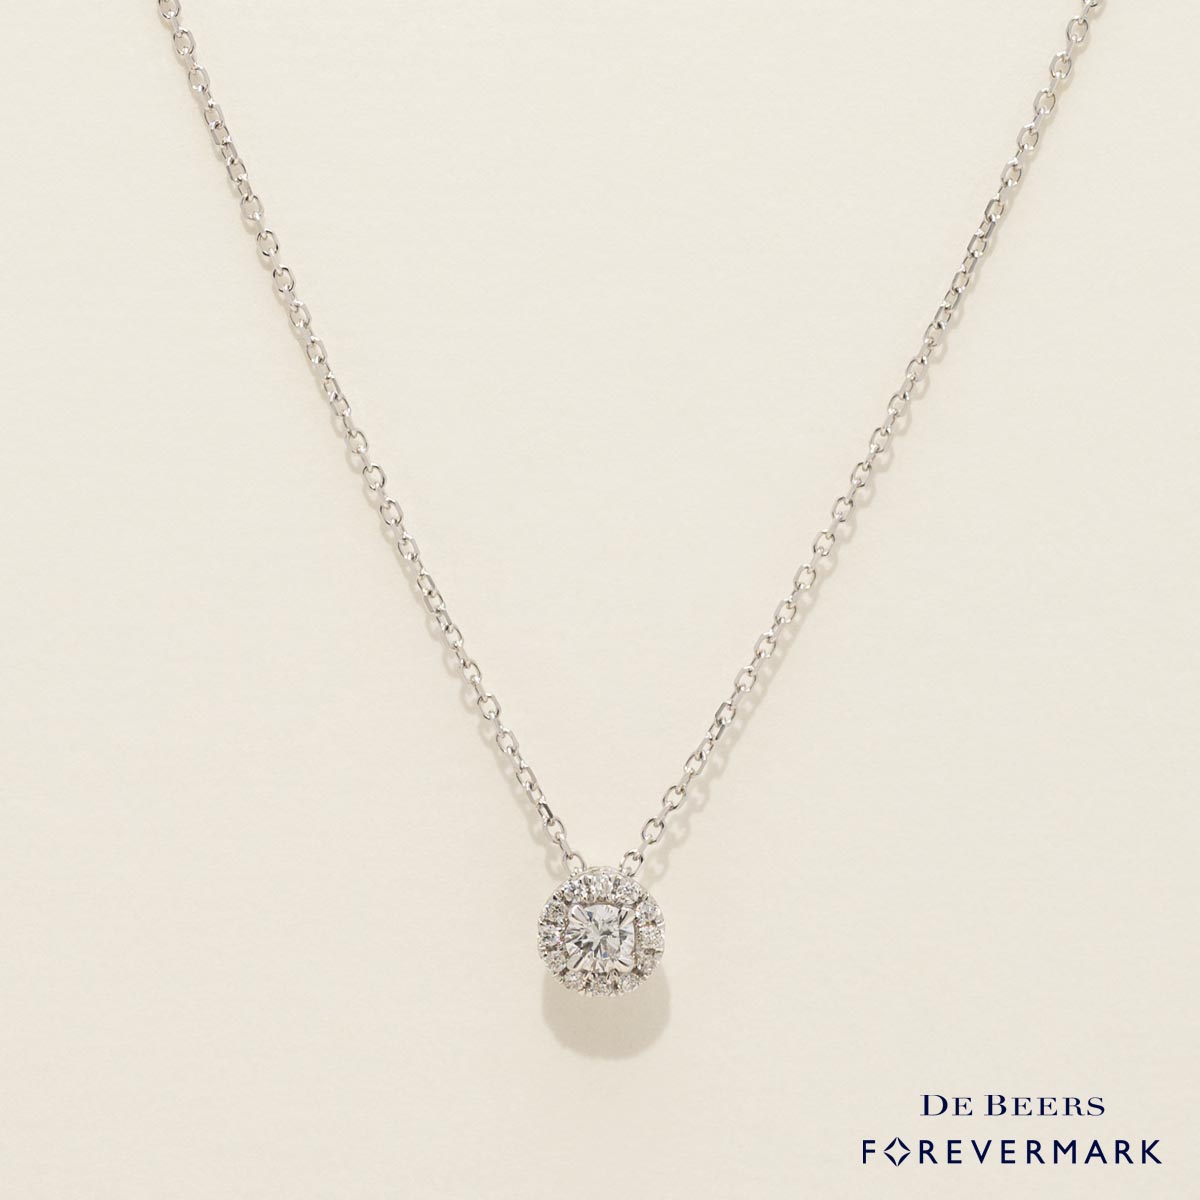 De Beers Forevermark Center of my Universe Diamond Halo Necklace in 18kt White Gold (1/10ct tw)